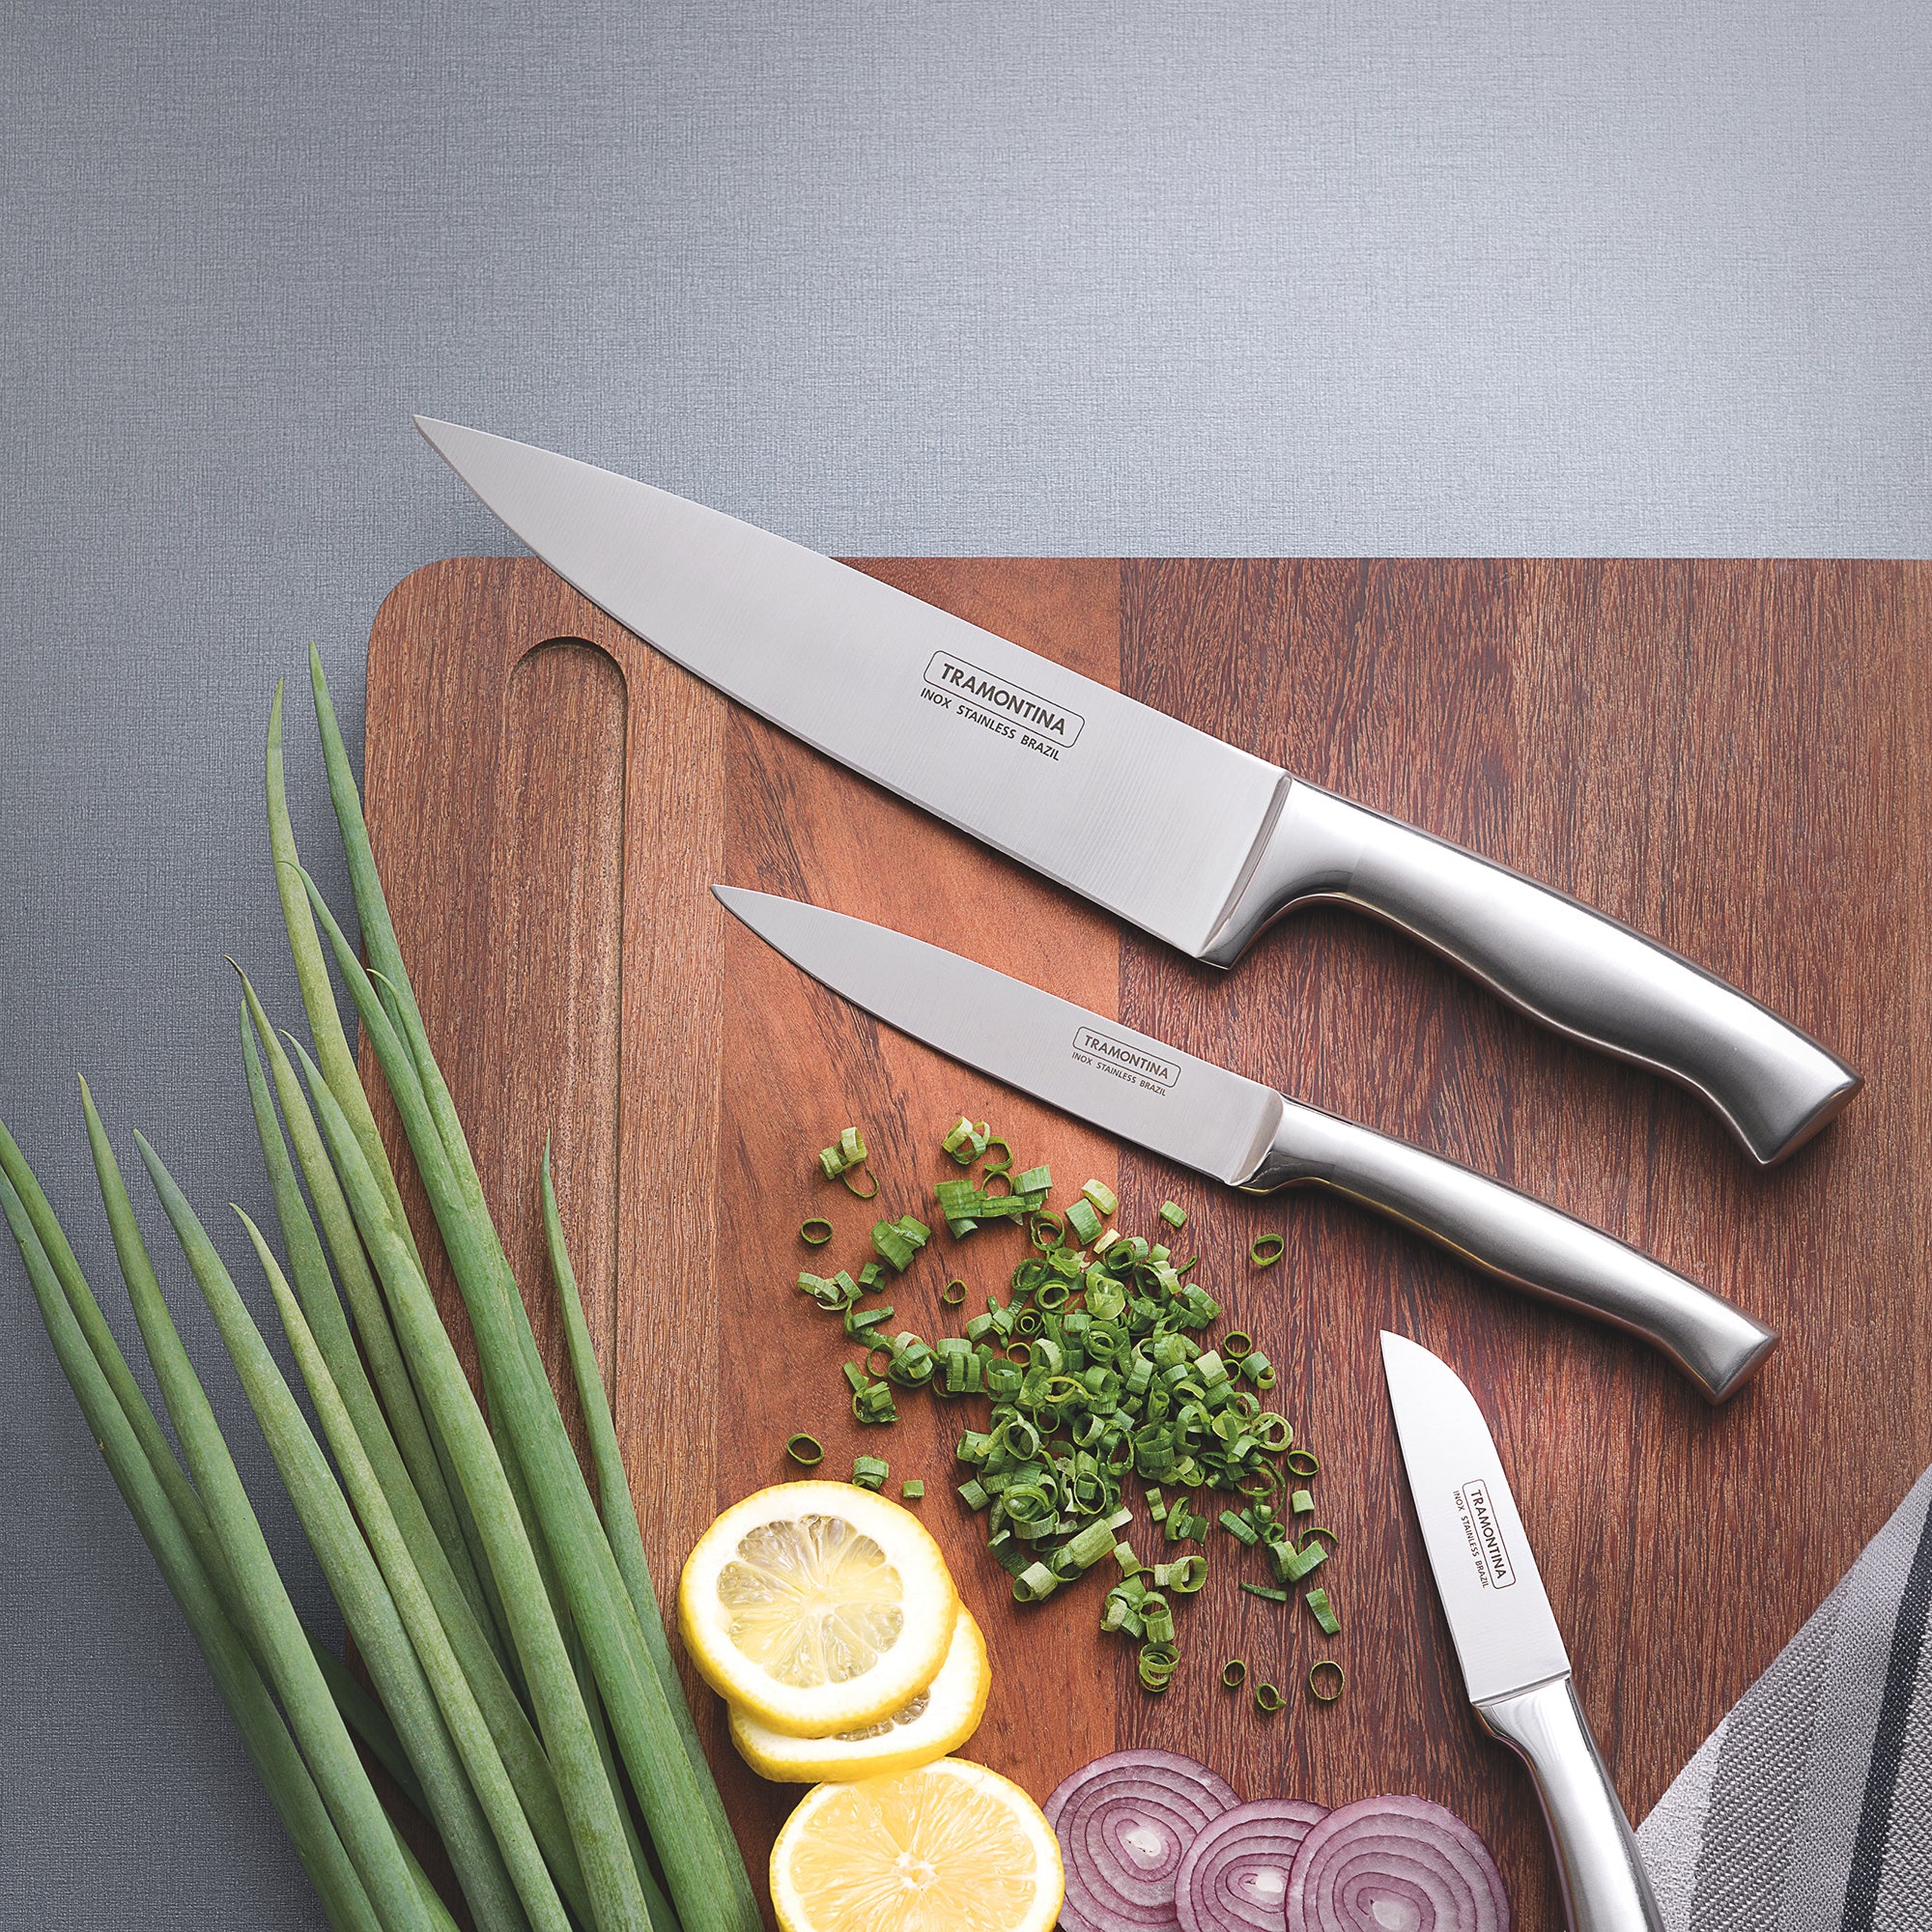 Pick up a new set of Tramontina forged kitchen knives with this deal from